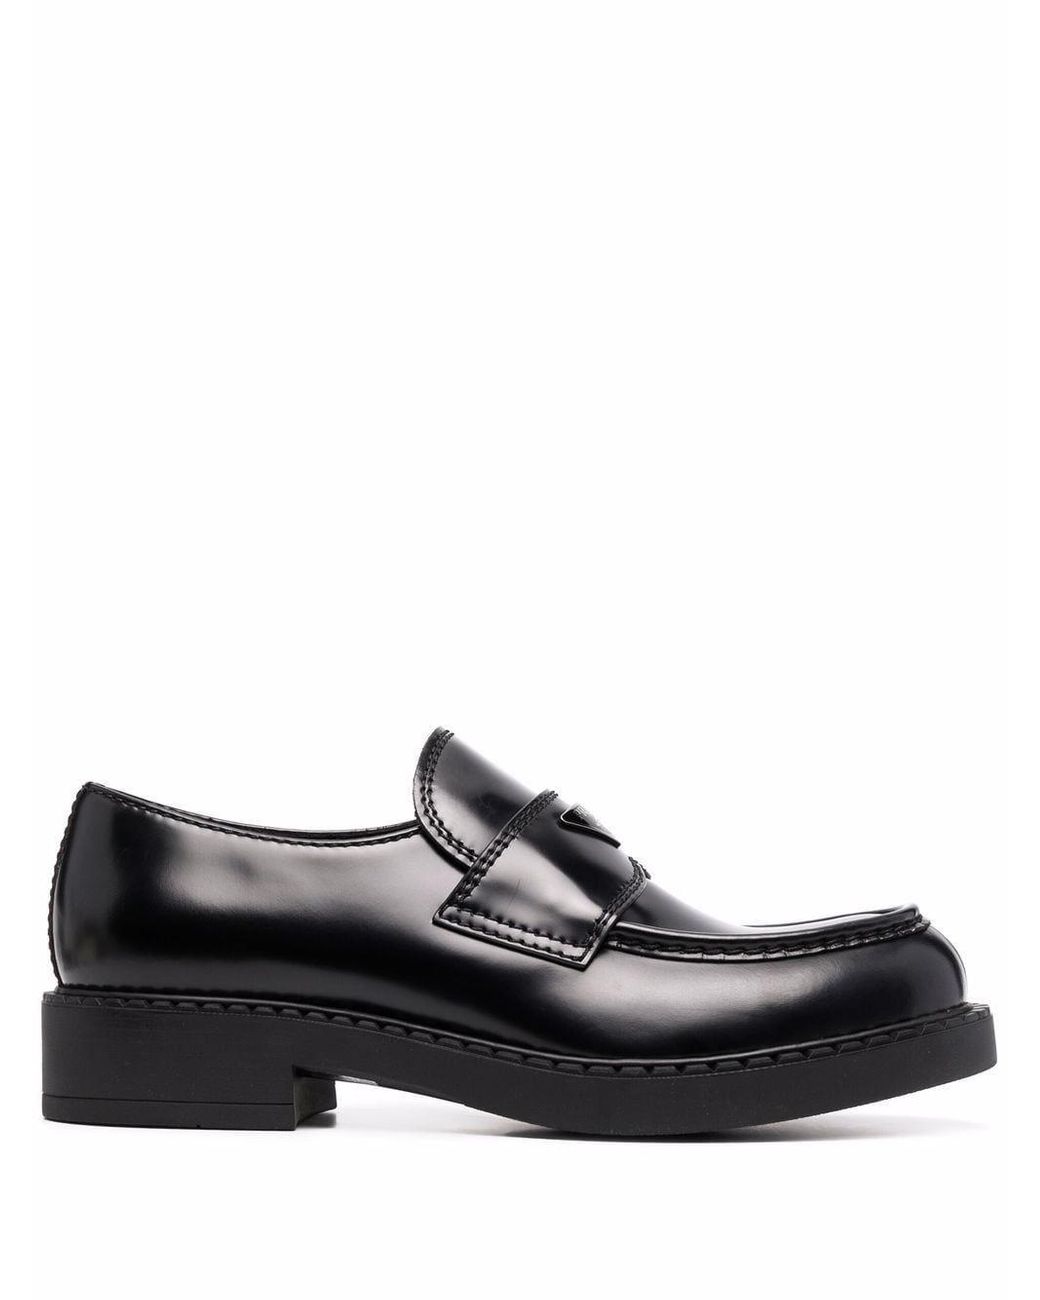 Prada Leather Logo-plaque Chunky Heel Loafers in Black for Men - Lyst